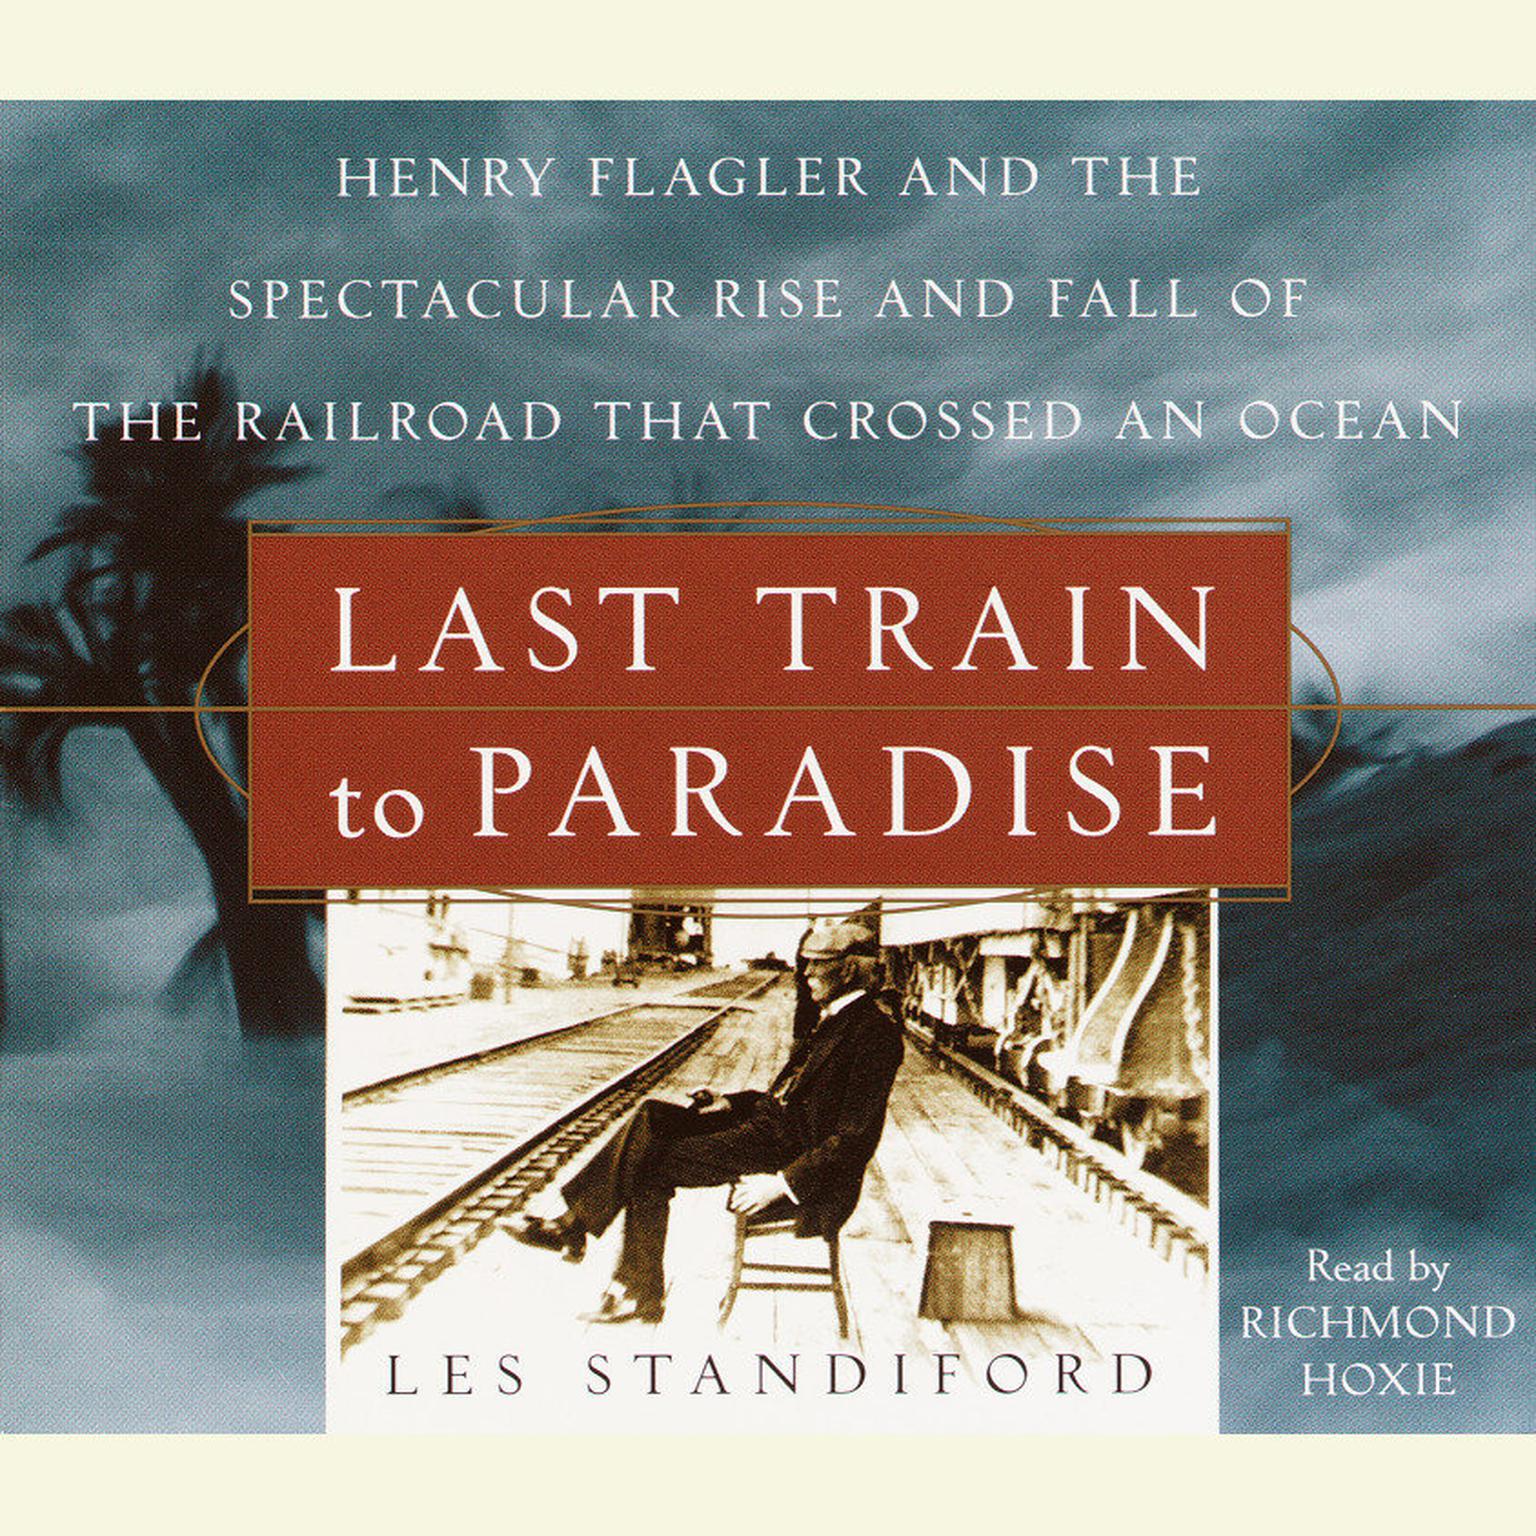 Last Train to Paradise (Abridged): Henry Flagler and the Spectacular Rise and Fall of the Railroad that Crossed an Ocean Audiobook, by Les Standiford